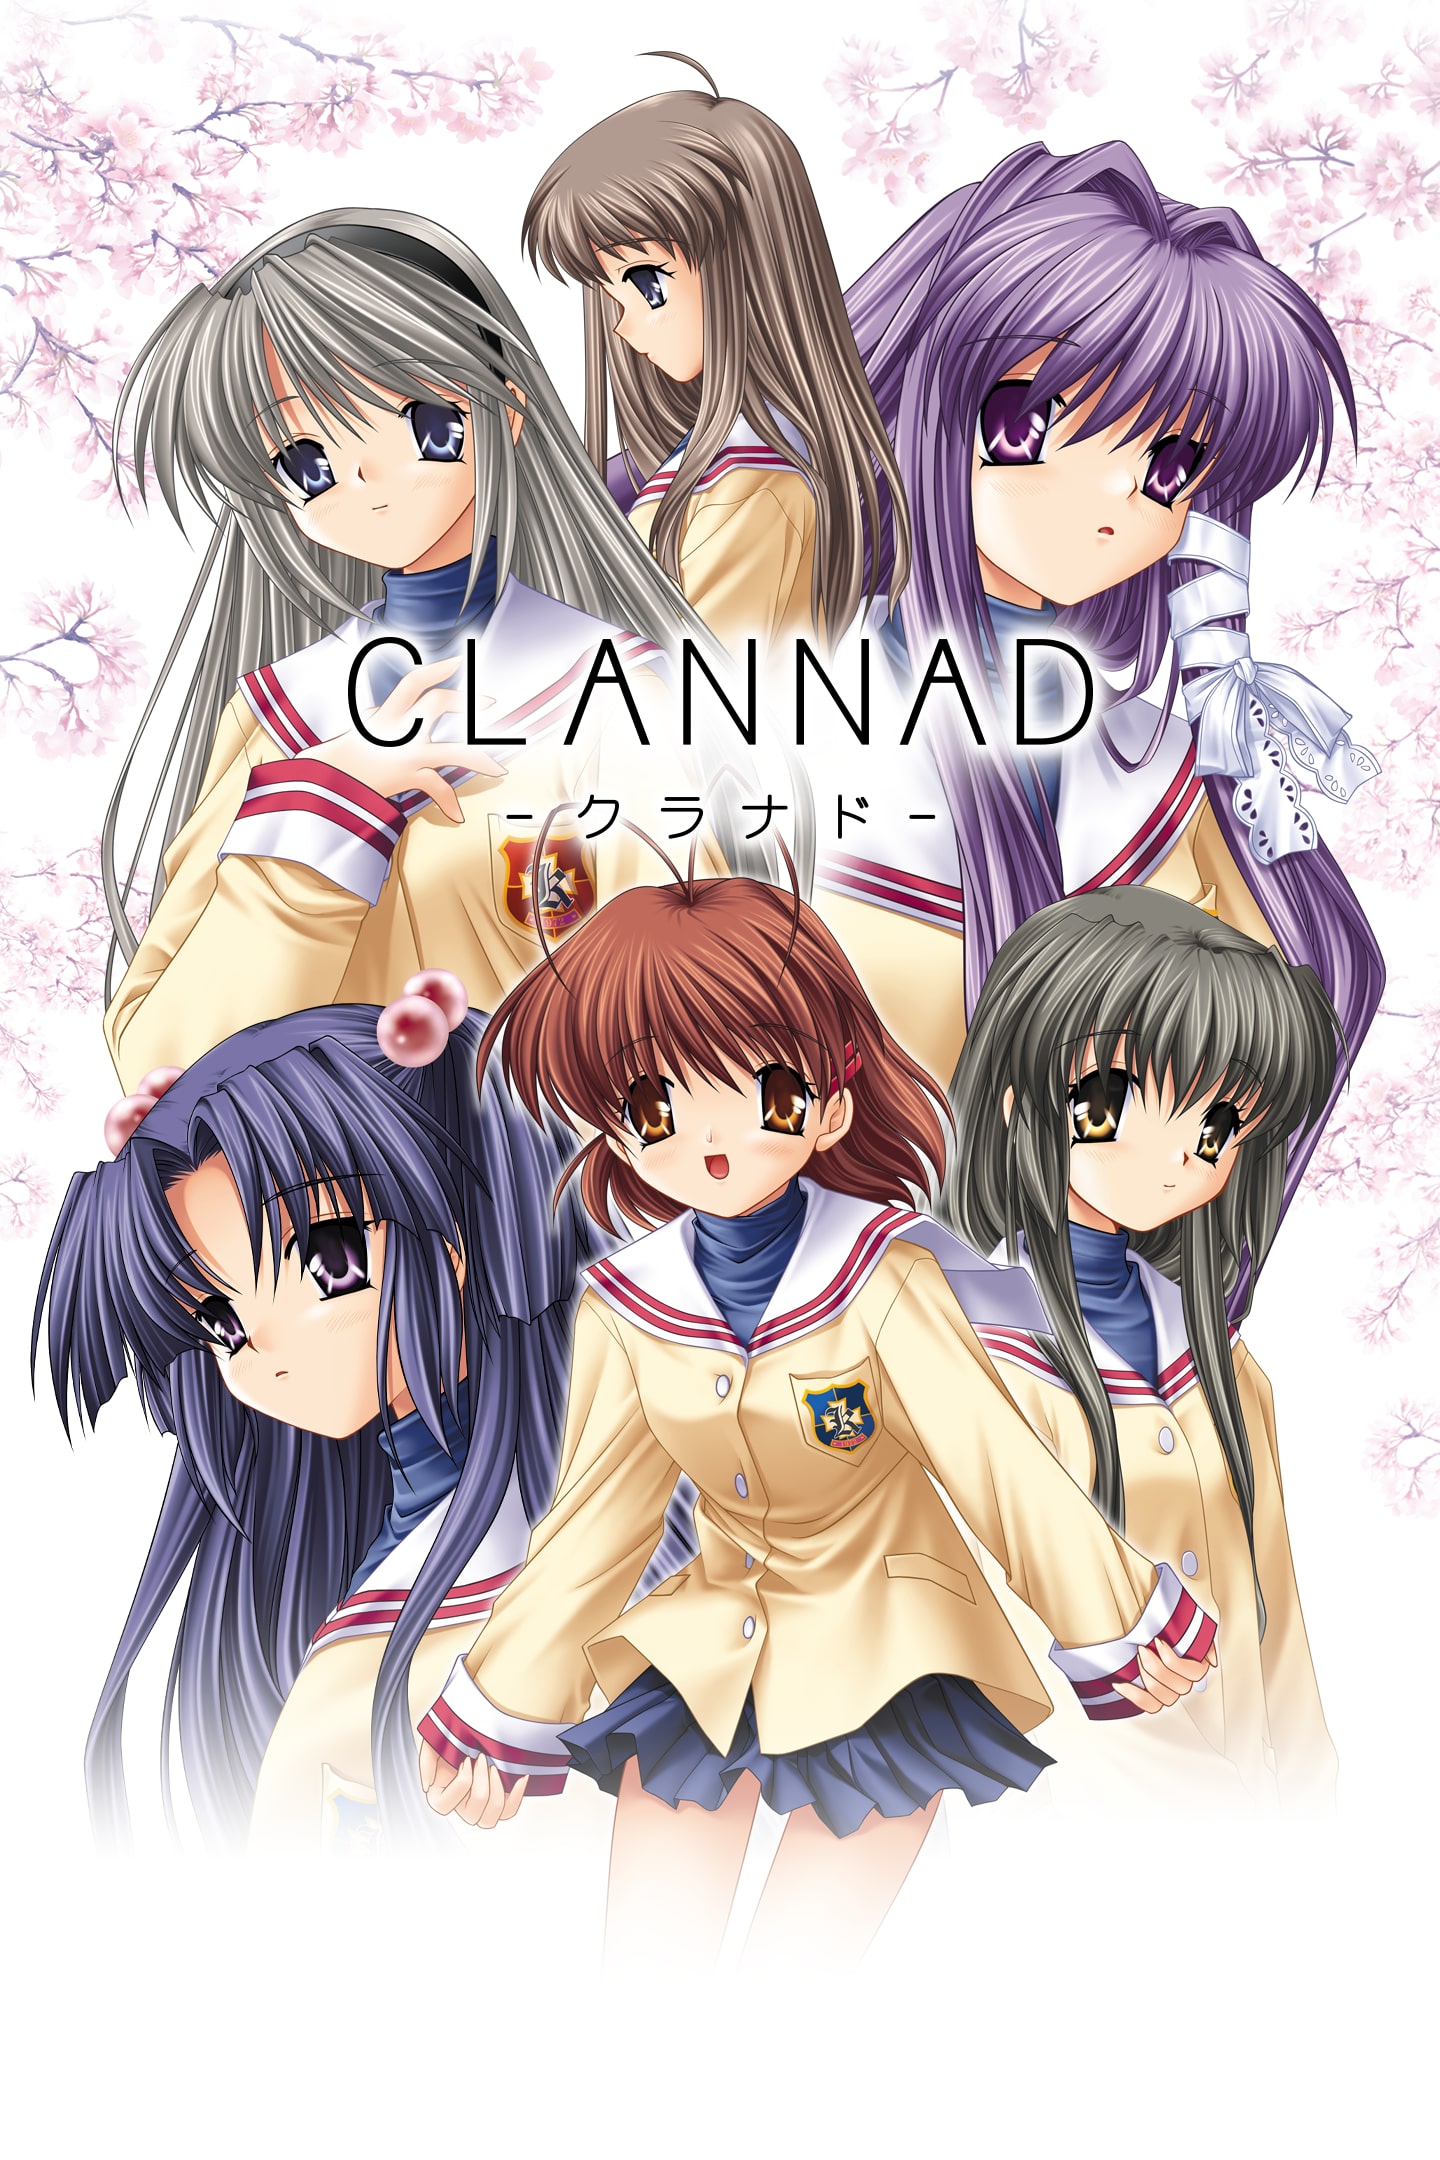 PS4 Version of Clannad Visual Novel Launches Today in the U.S. - Crunchyroll  News